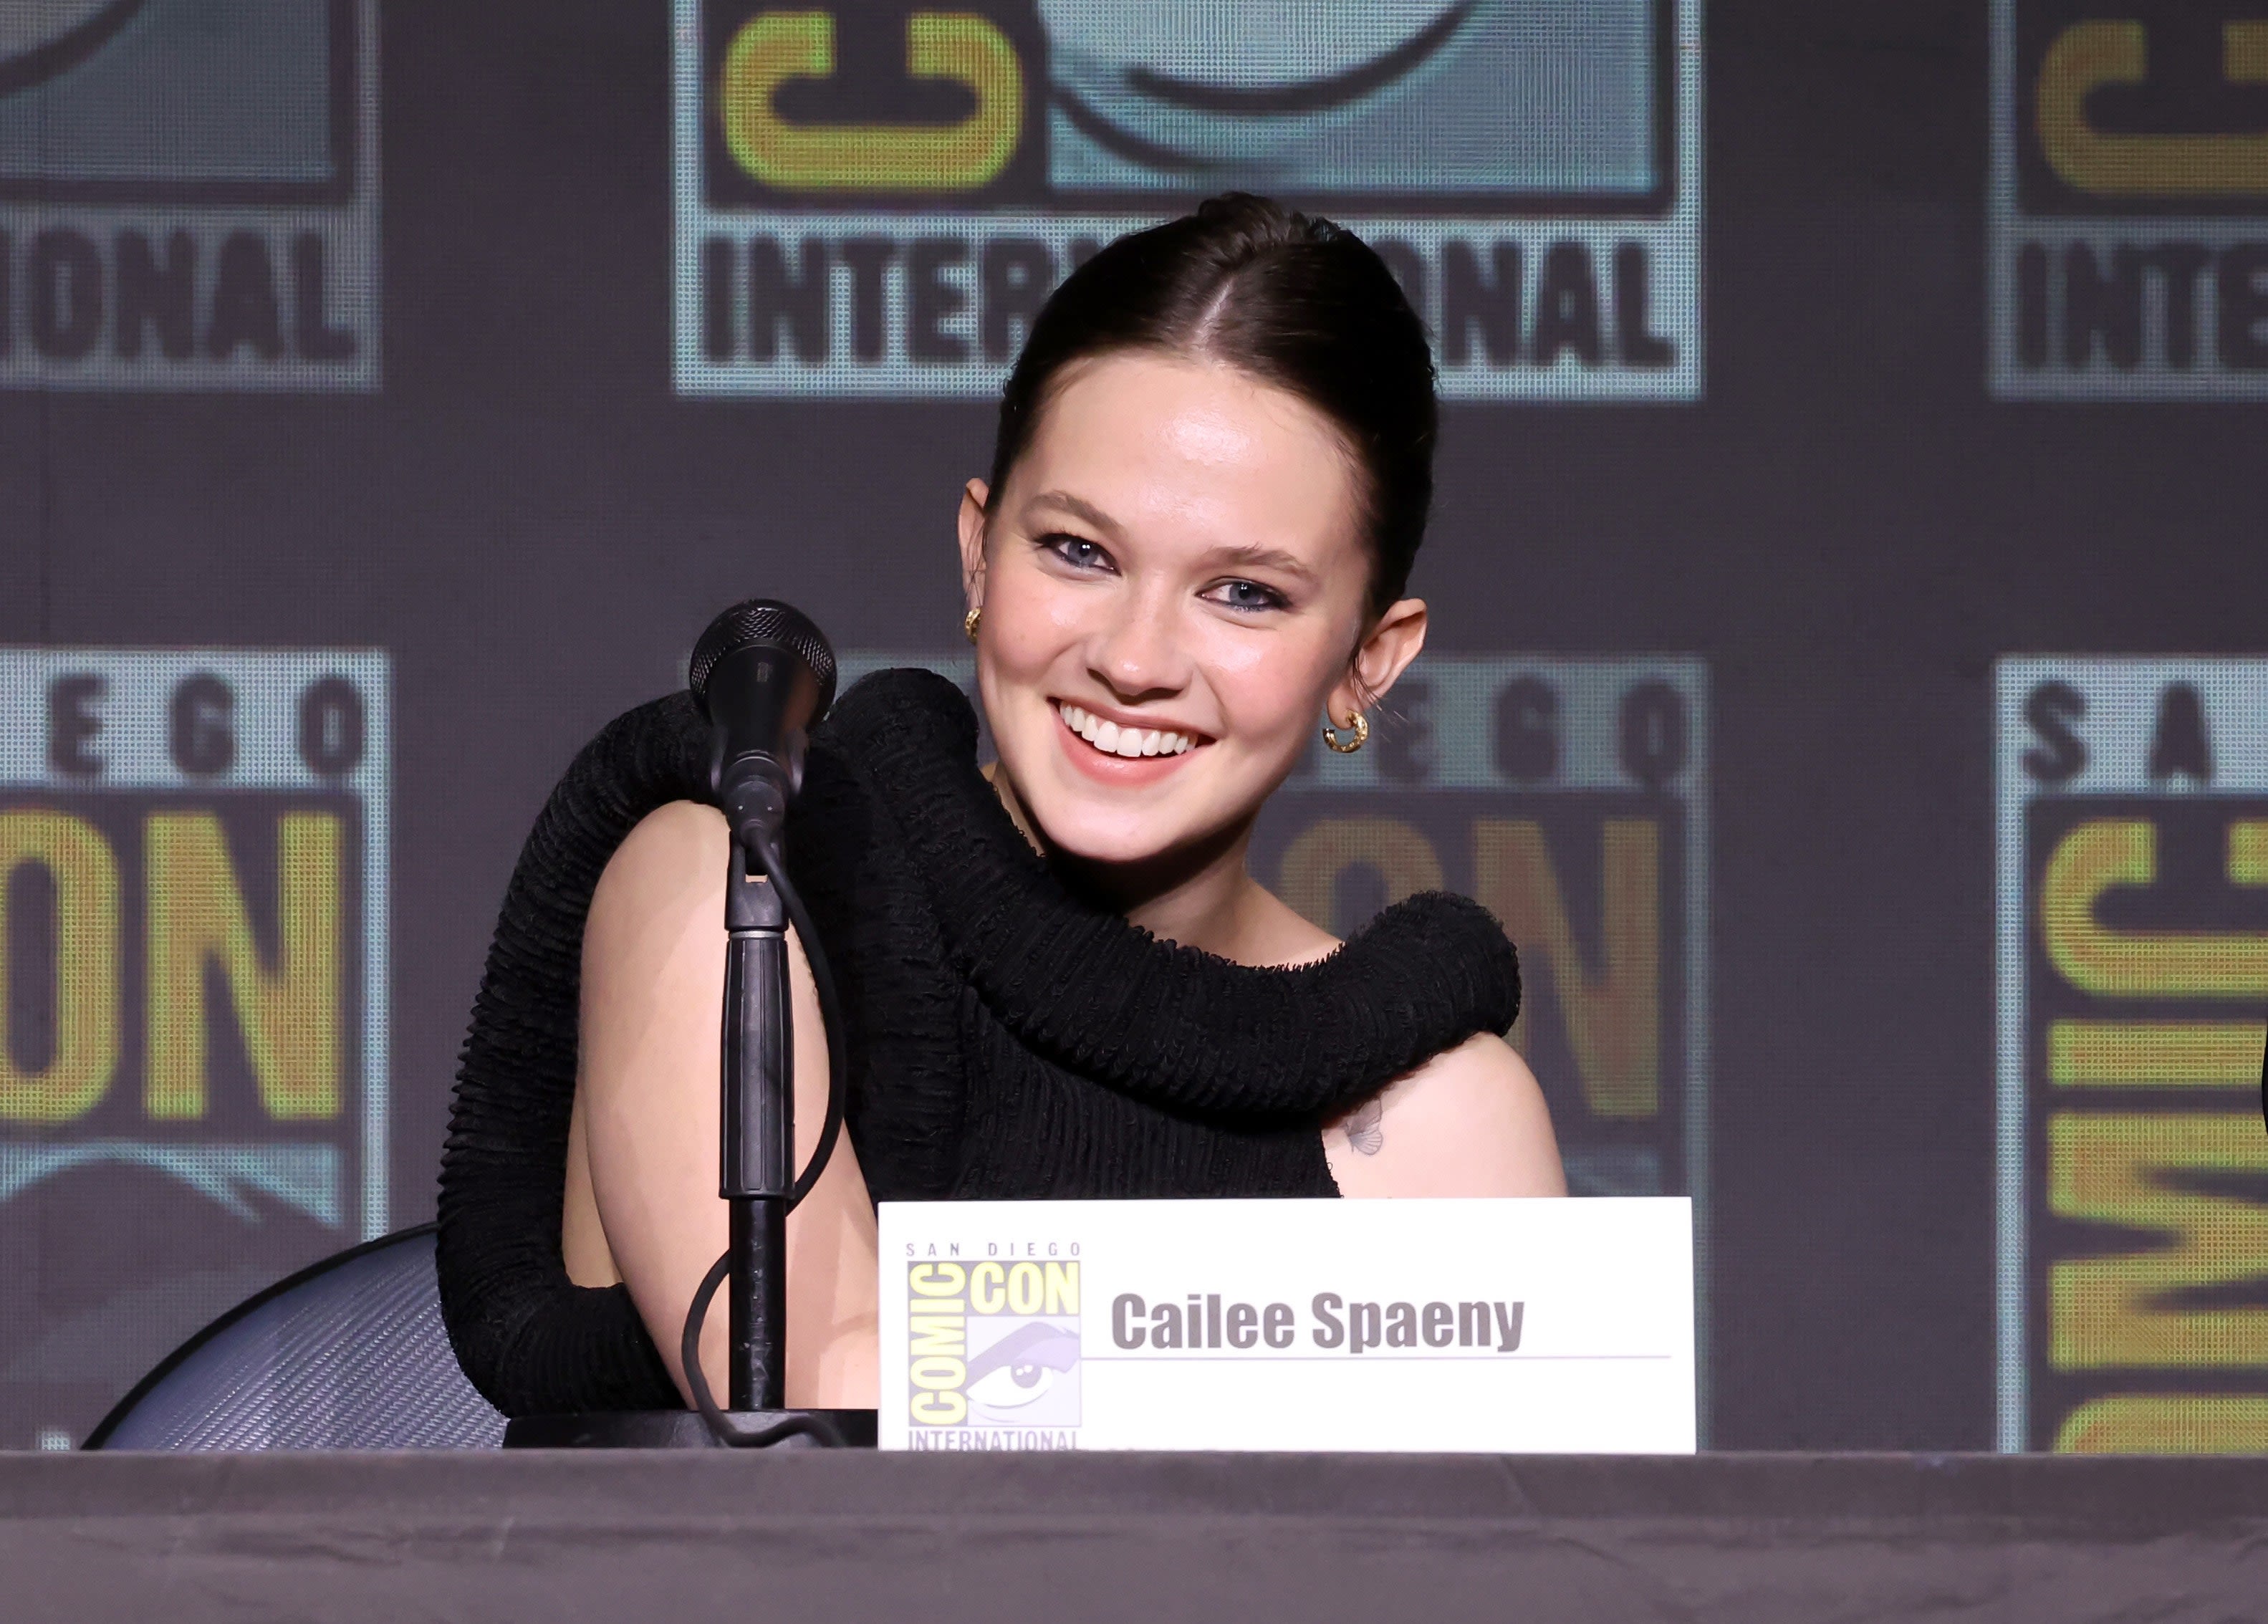 Cailee Spaeny Reveals She and Chappell Roan Were in the Same Talent Shows